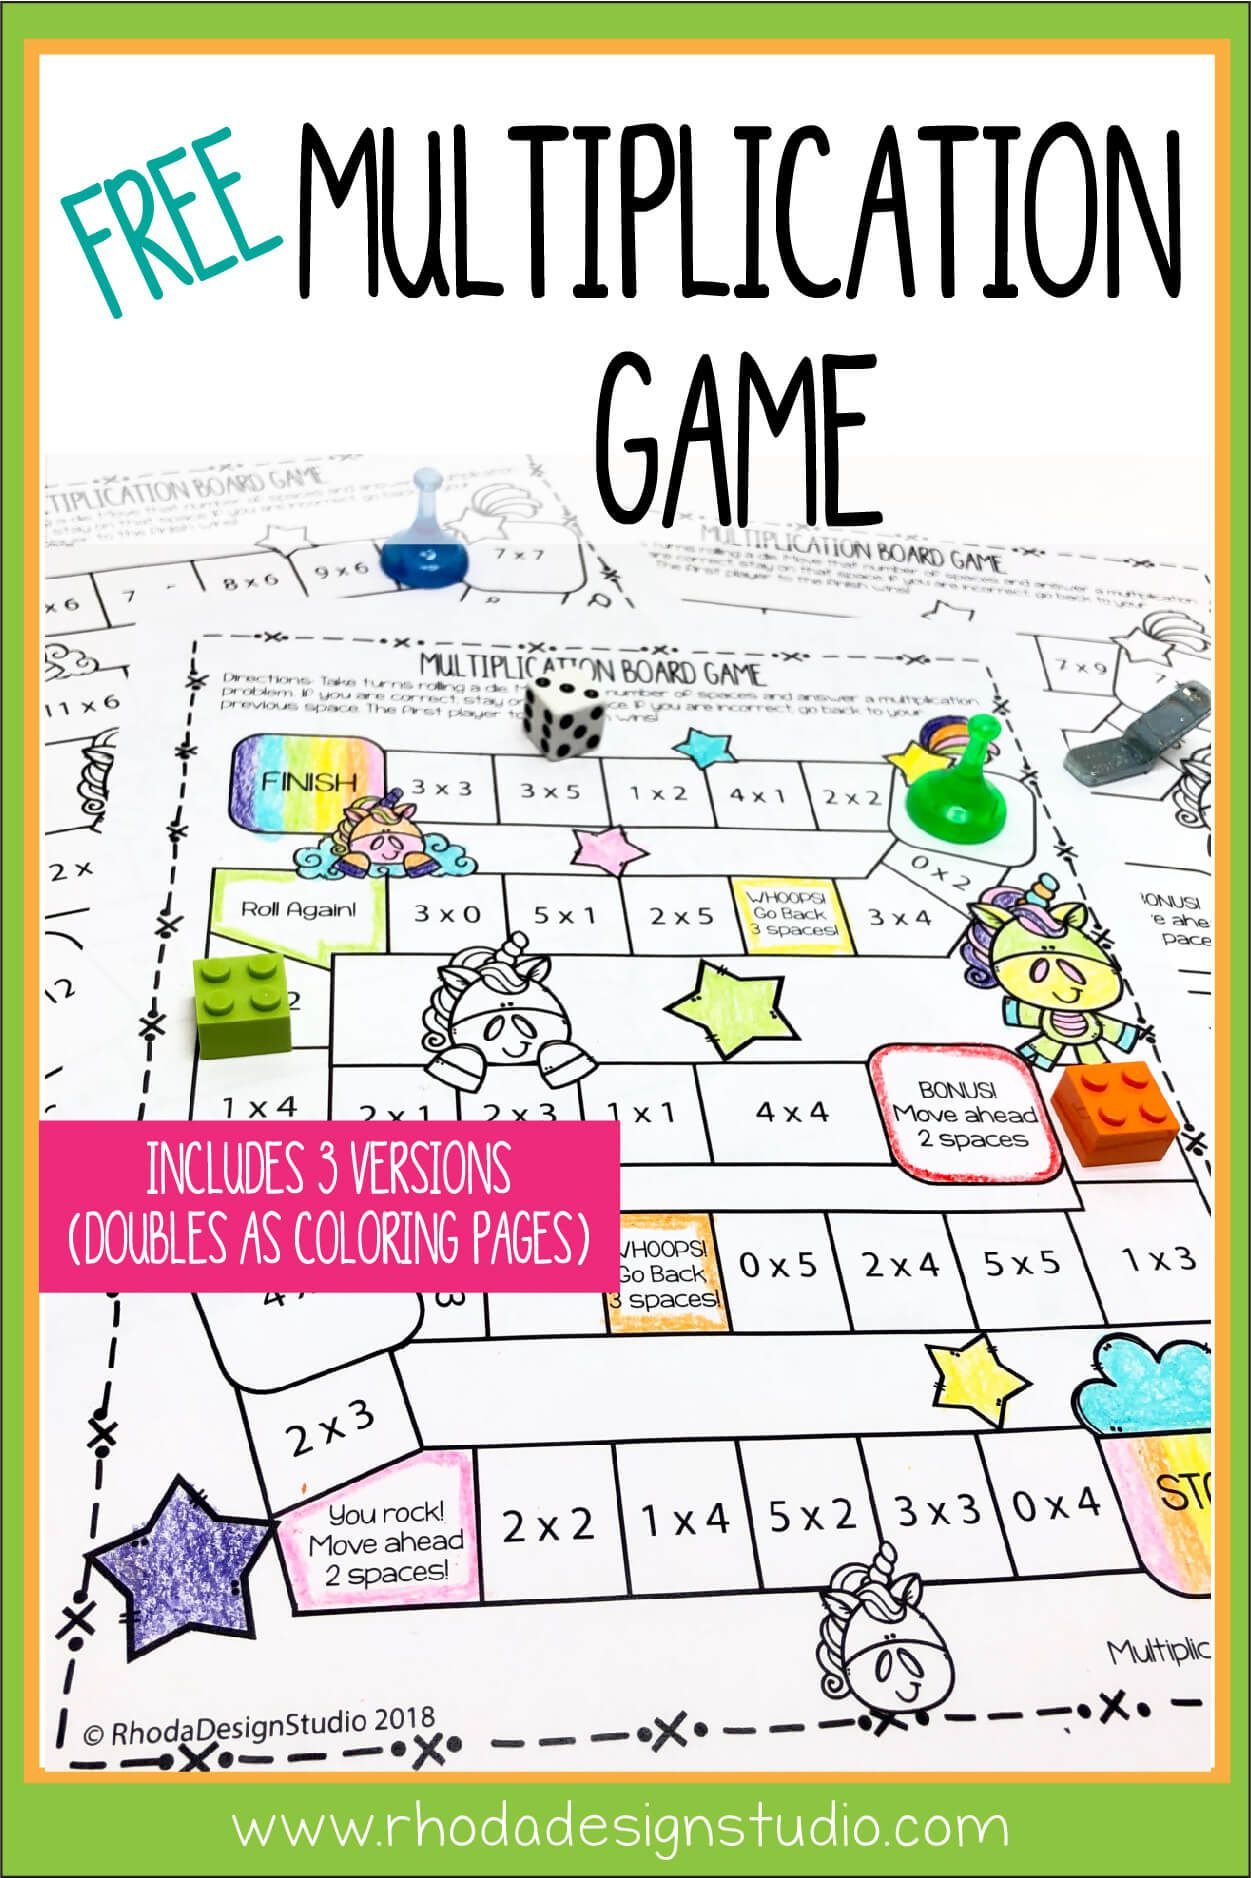 Easy To Use Free Multiplication Game Printables | Rhoda for Printable Multiplication Games Free